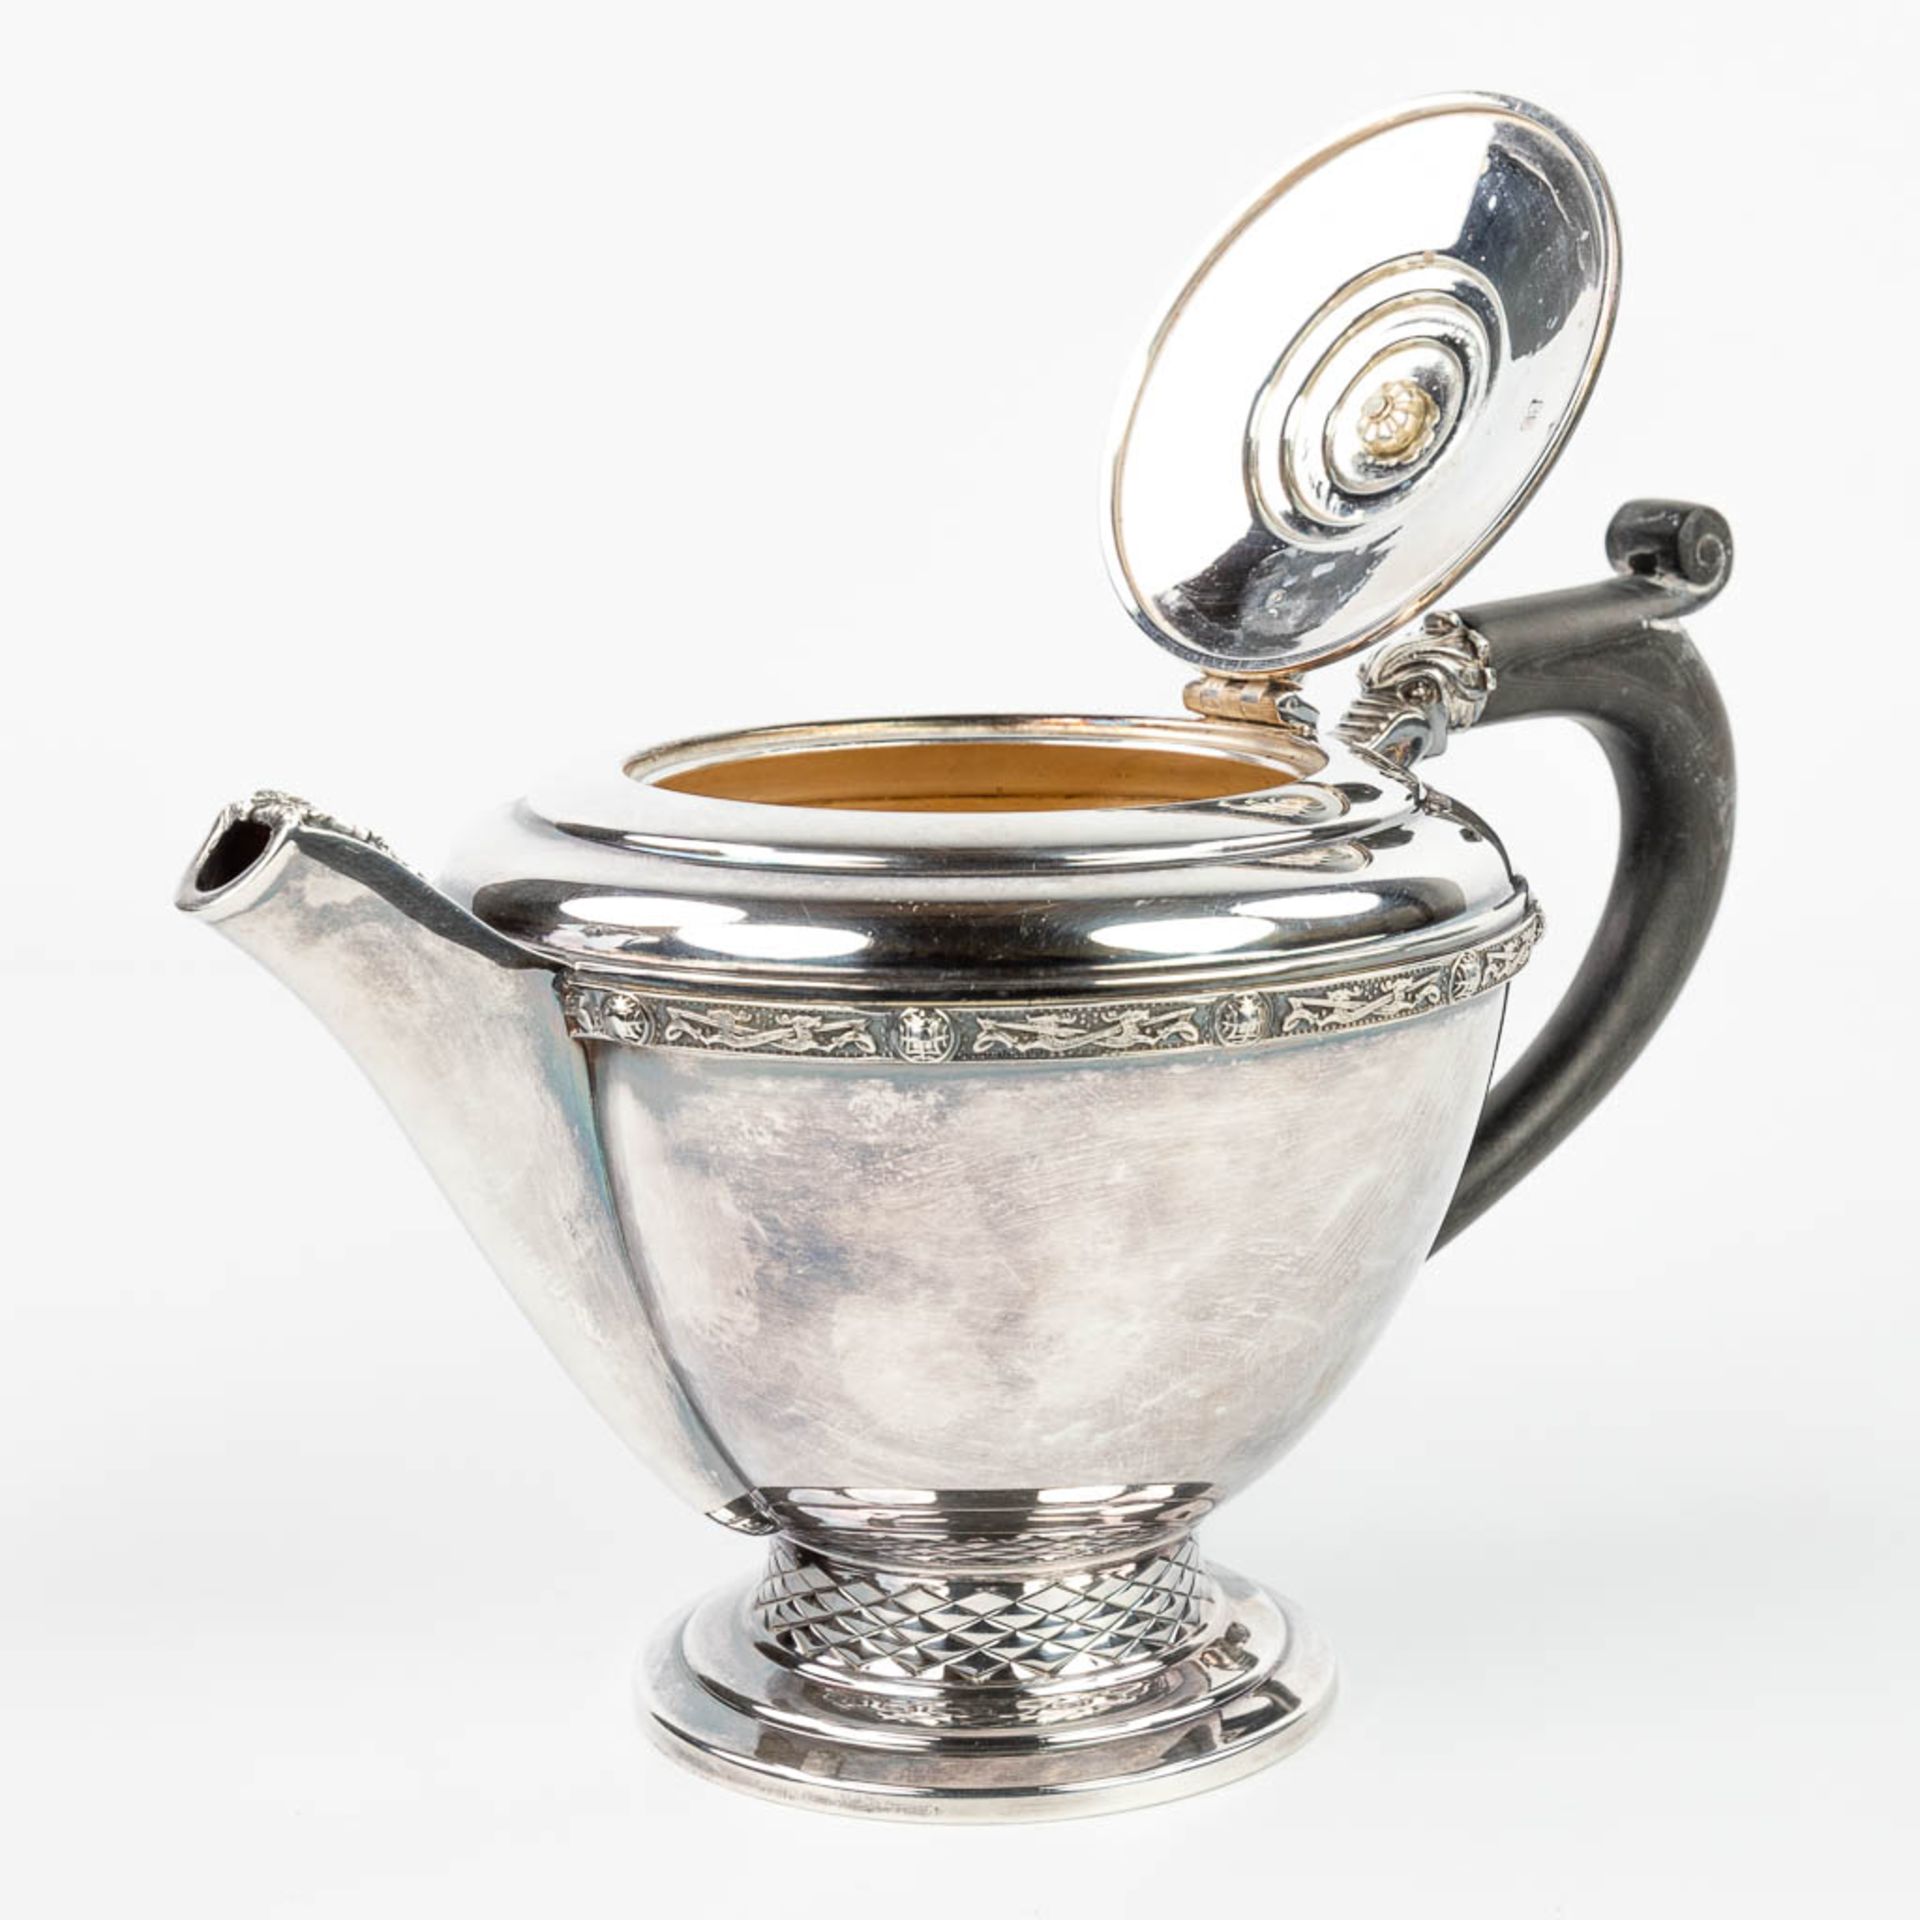 A fine silver teapot with ebony handles and made in Ireland, 1977. (H:16,5cm) - Image 10 of 18